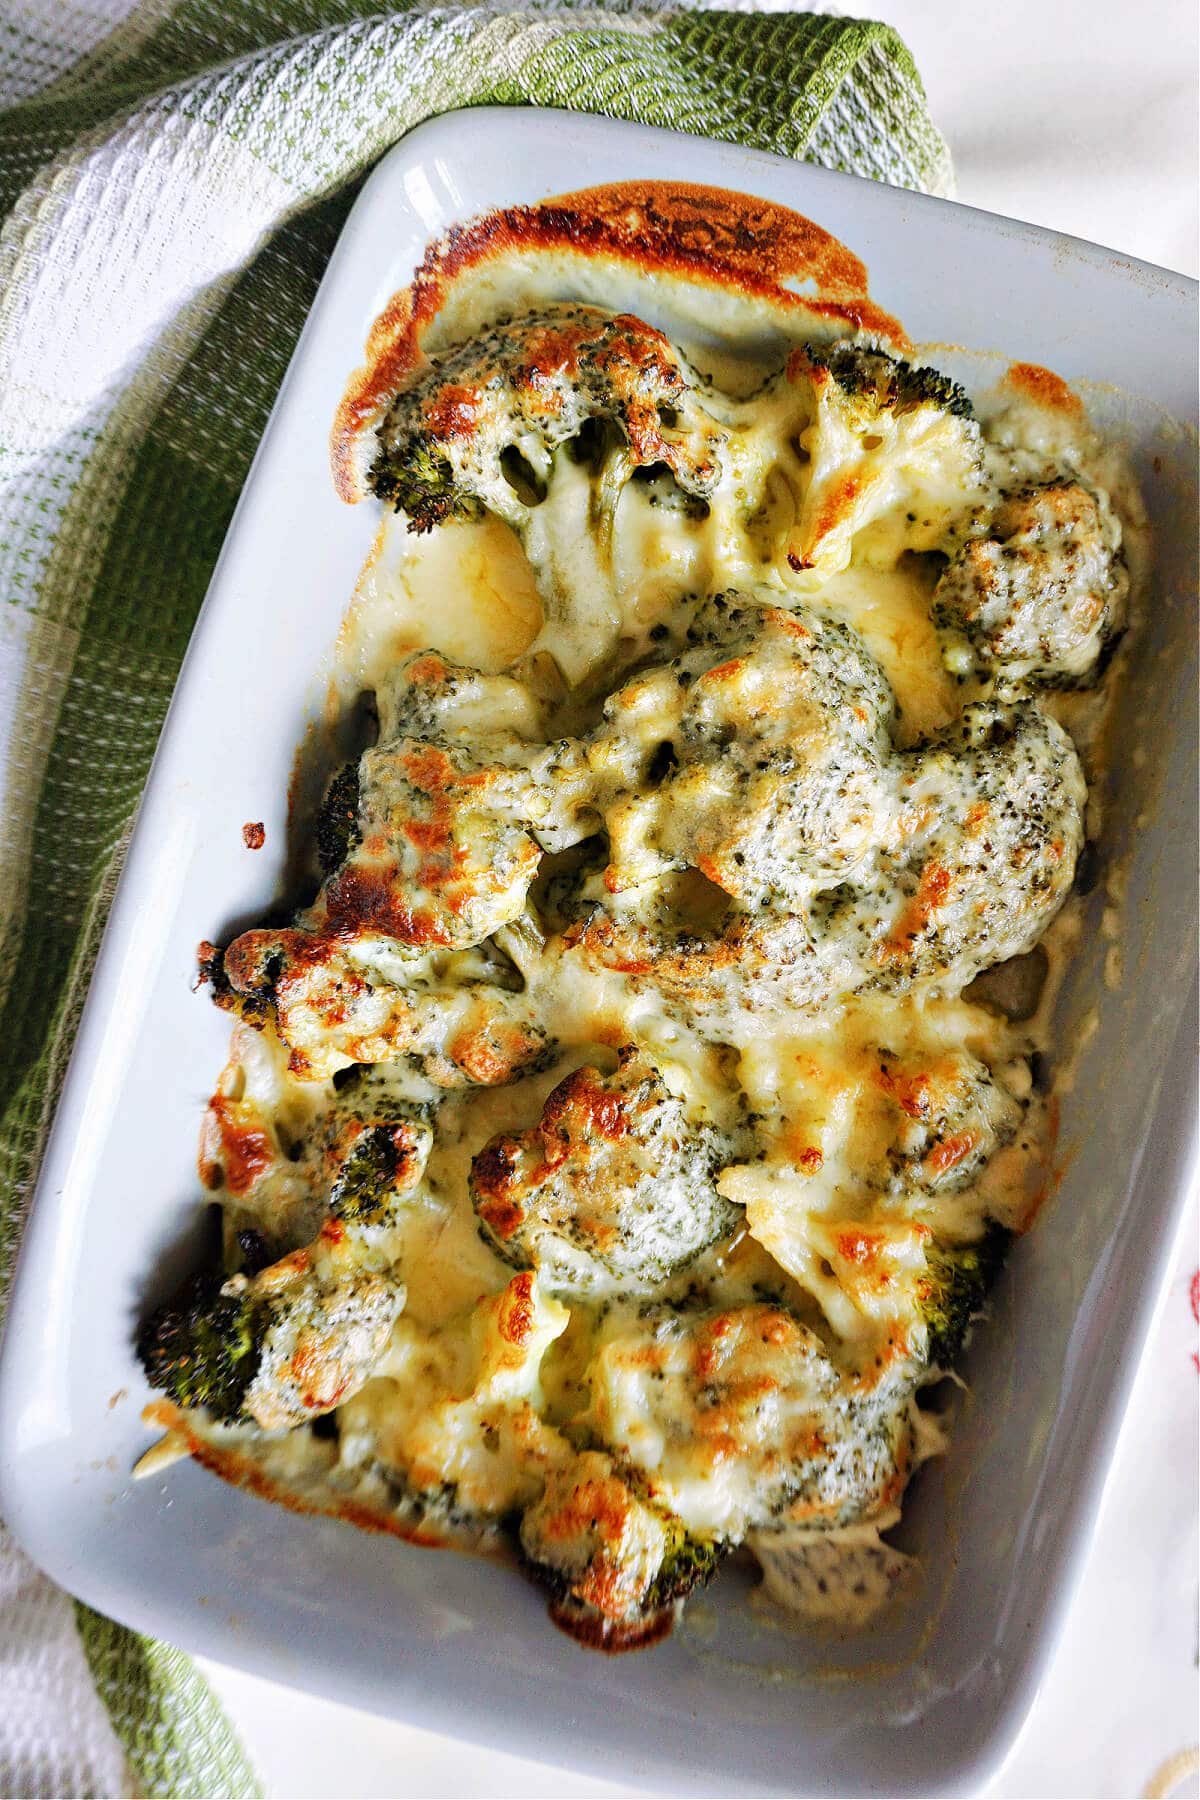 A dish with baked cheesy broccoli.